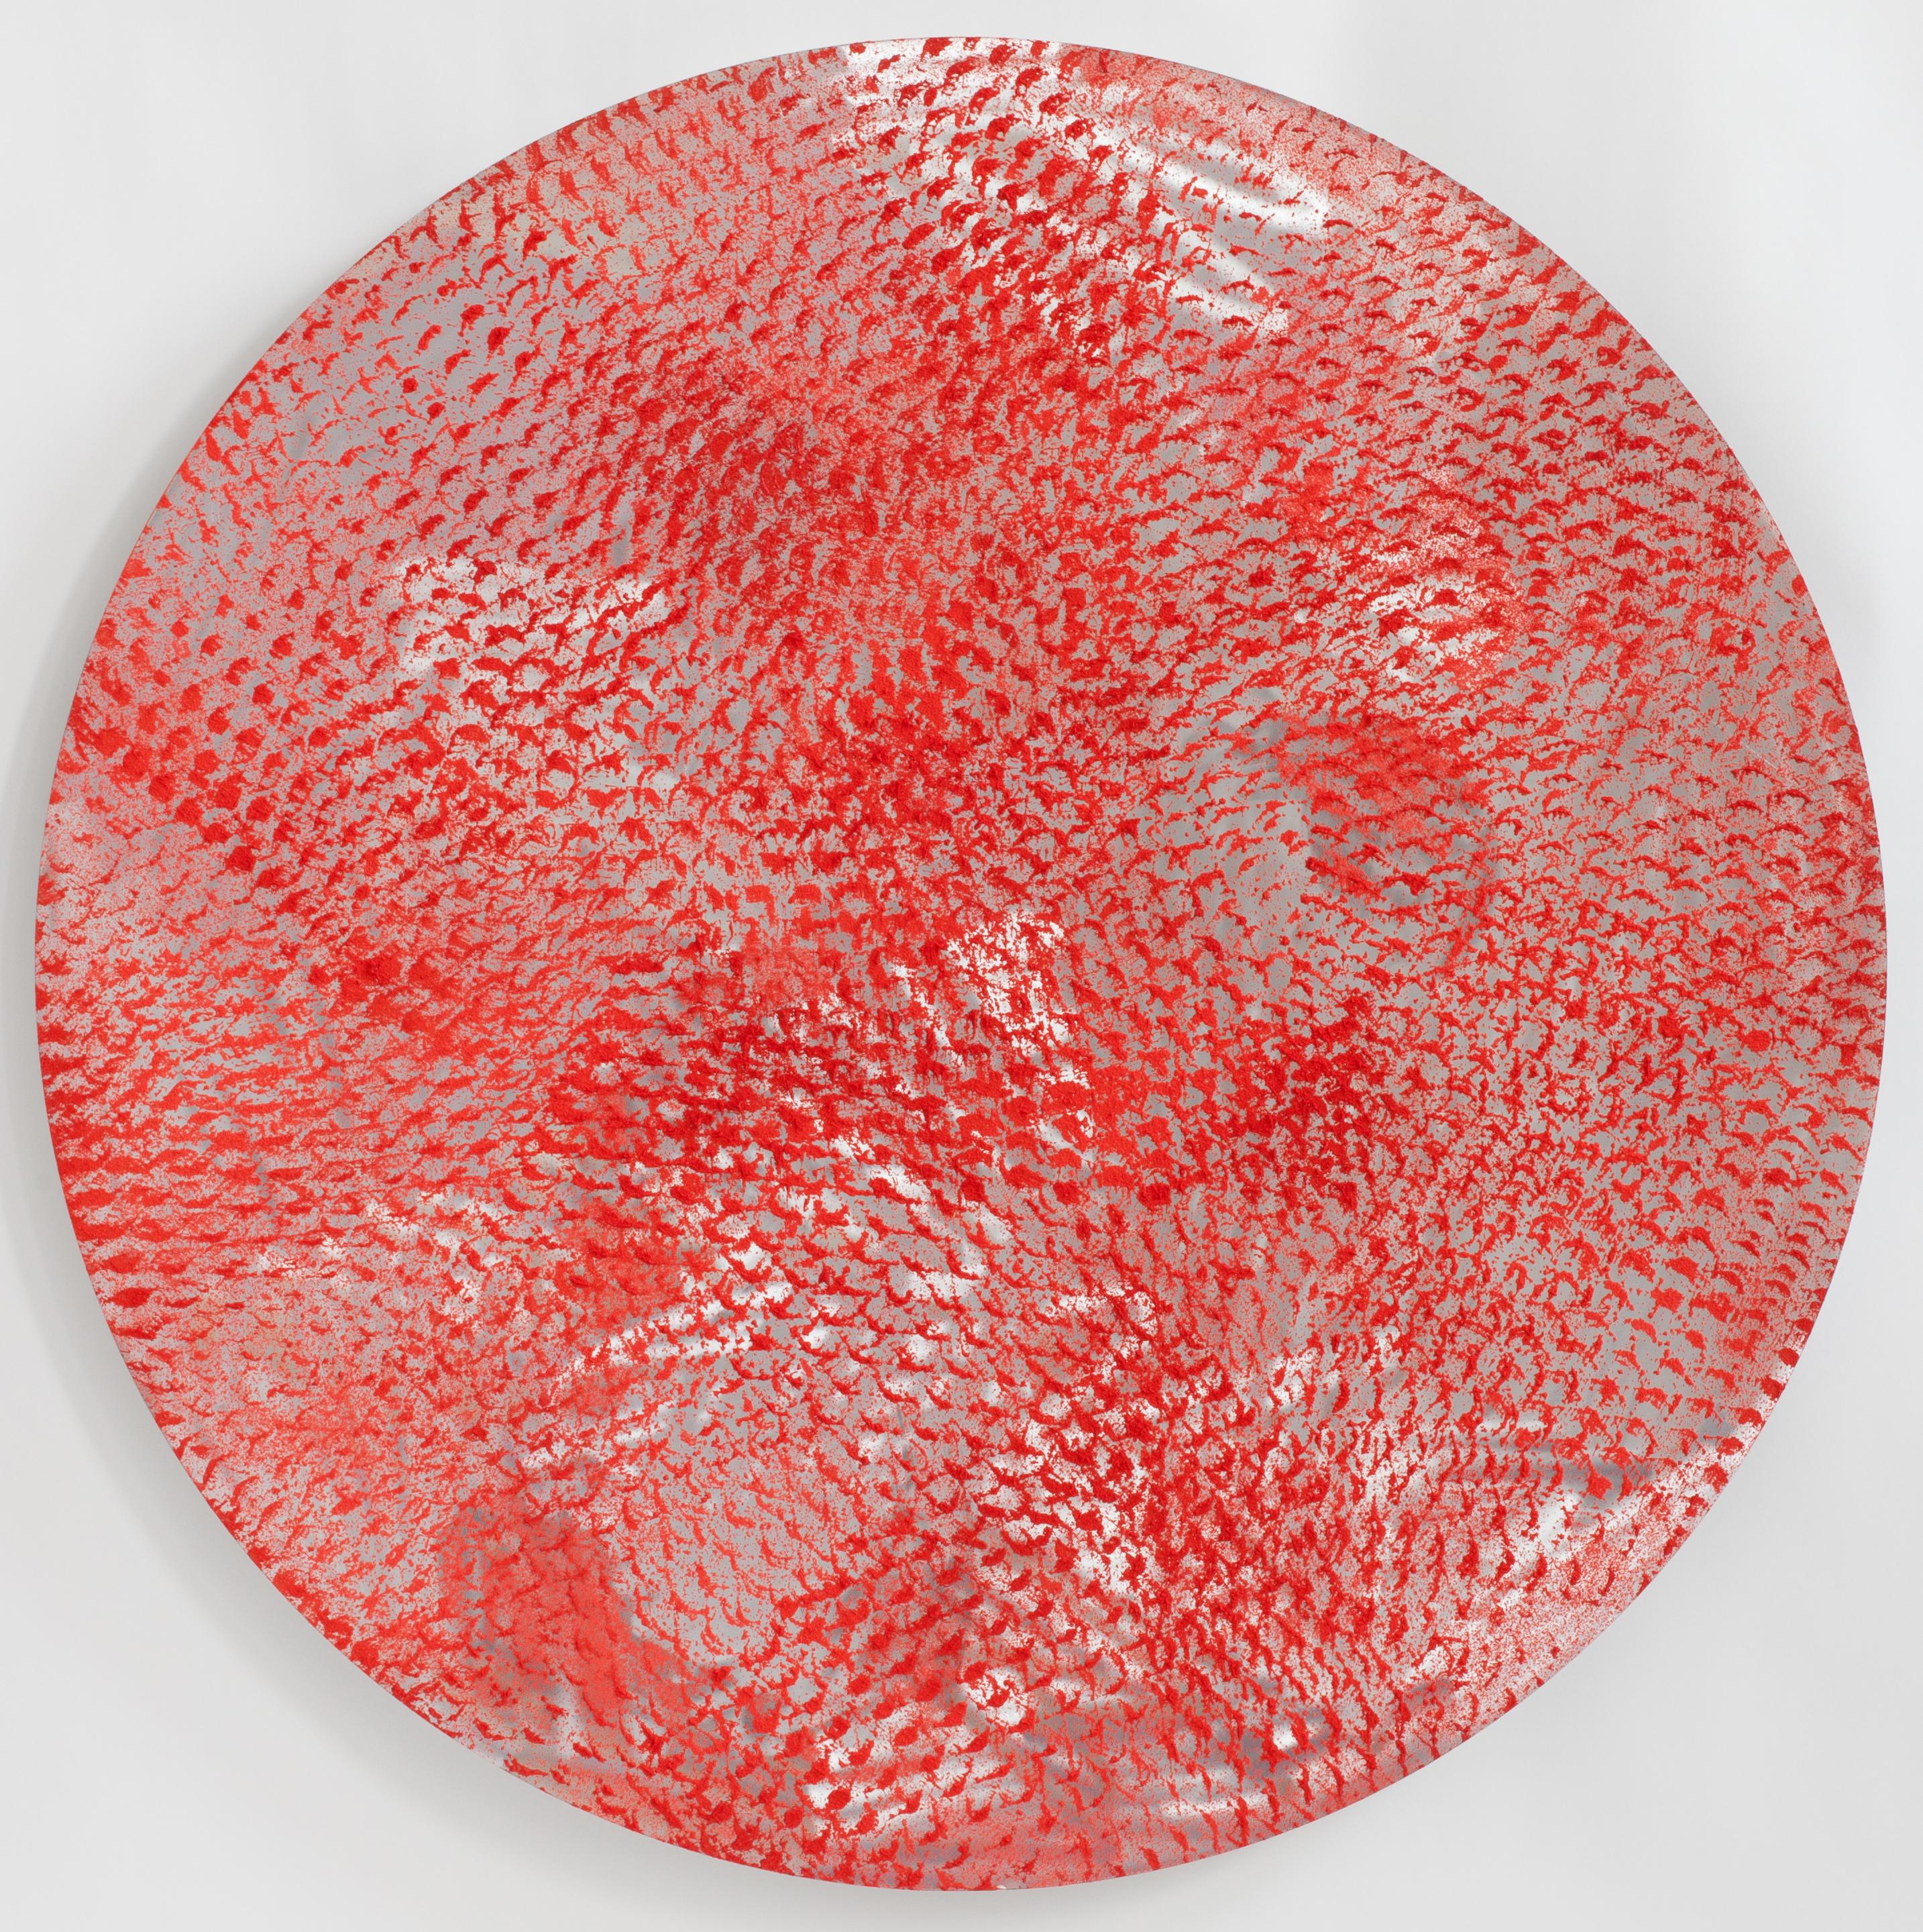 Tondo Red, Expanded Metal Pigment Painting